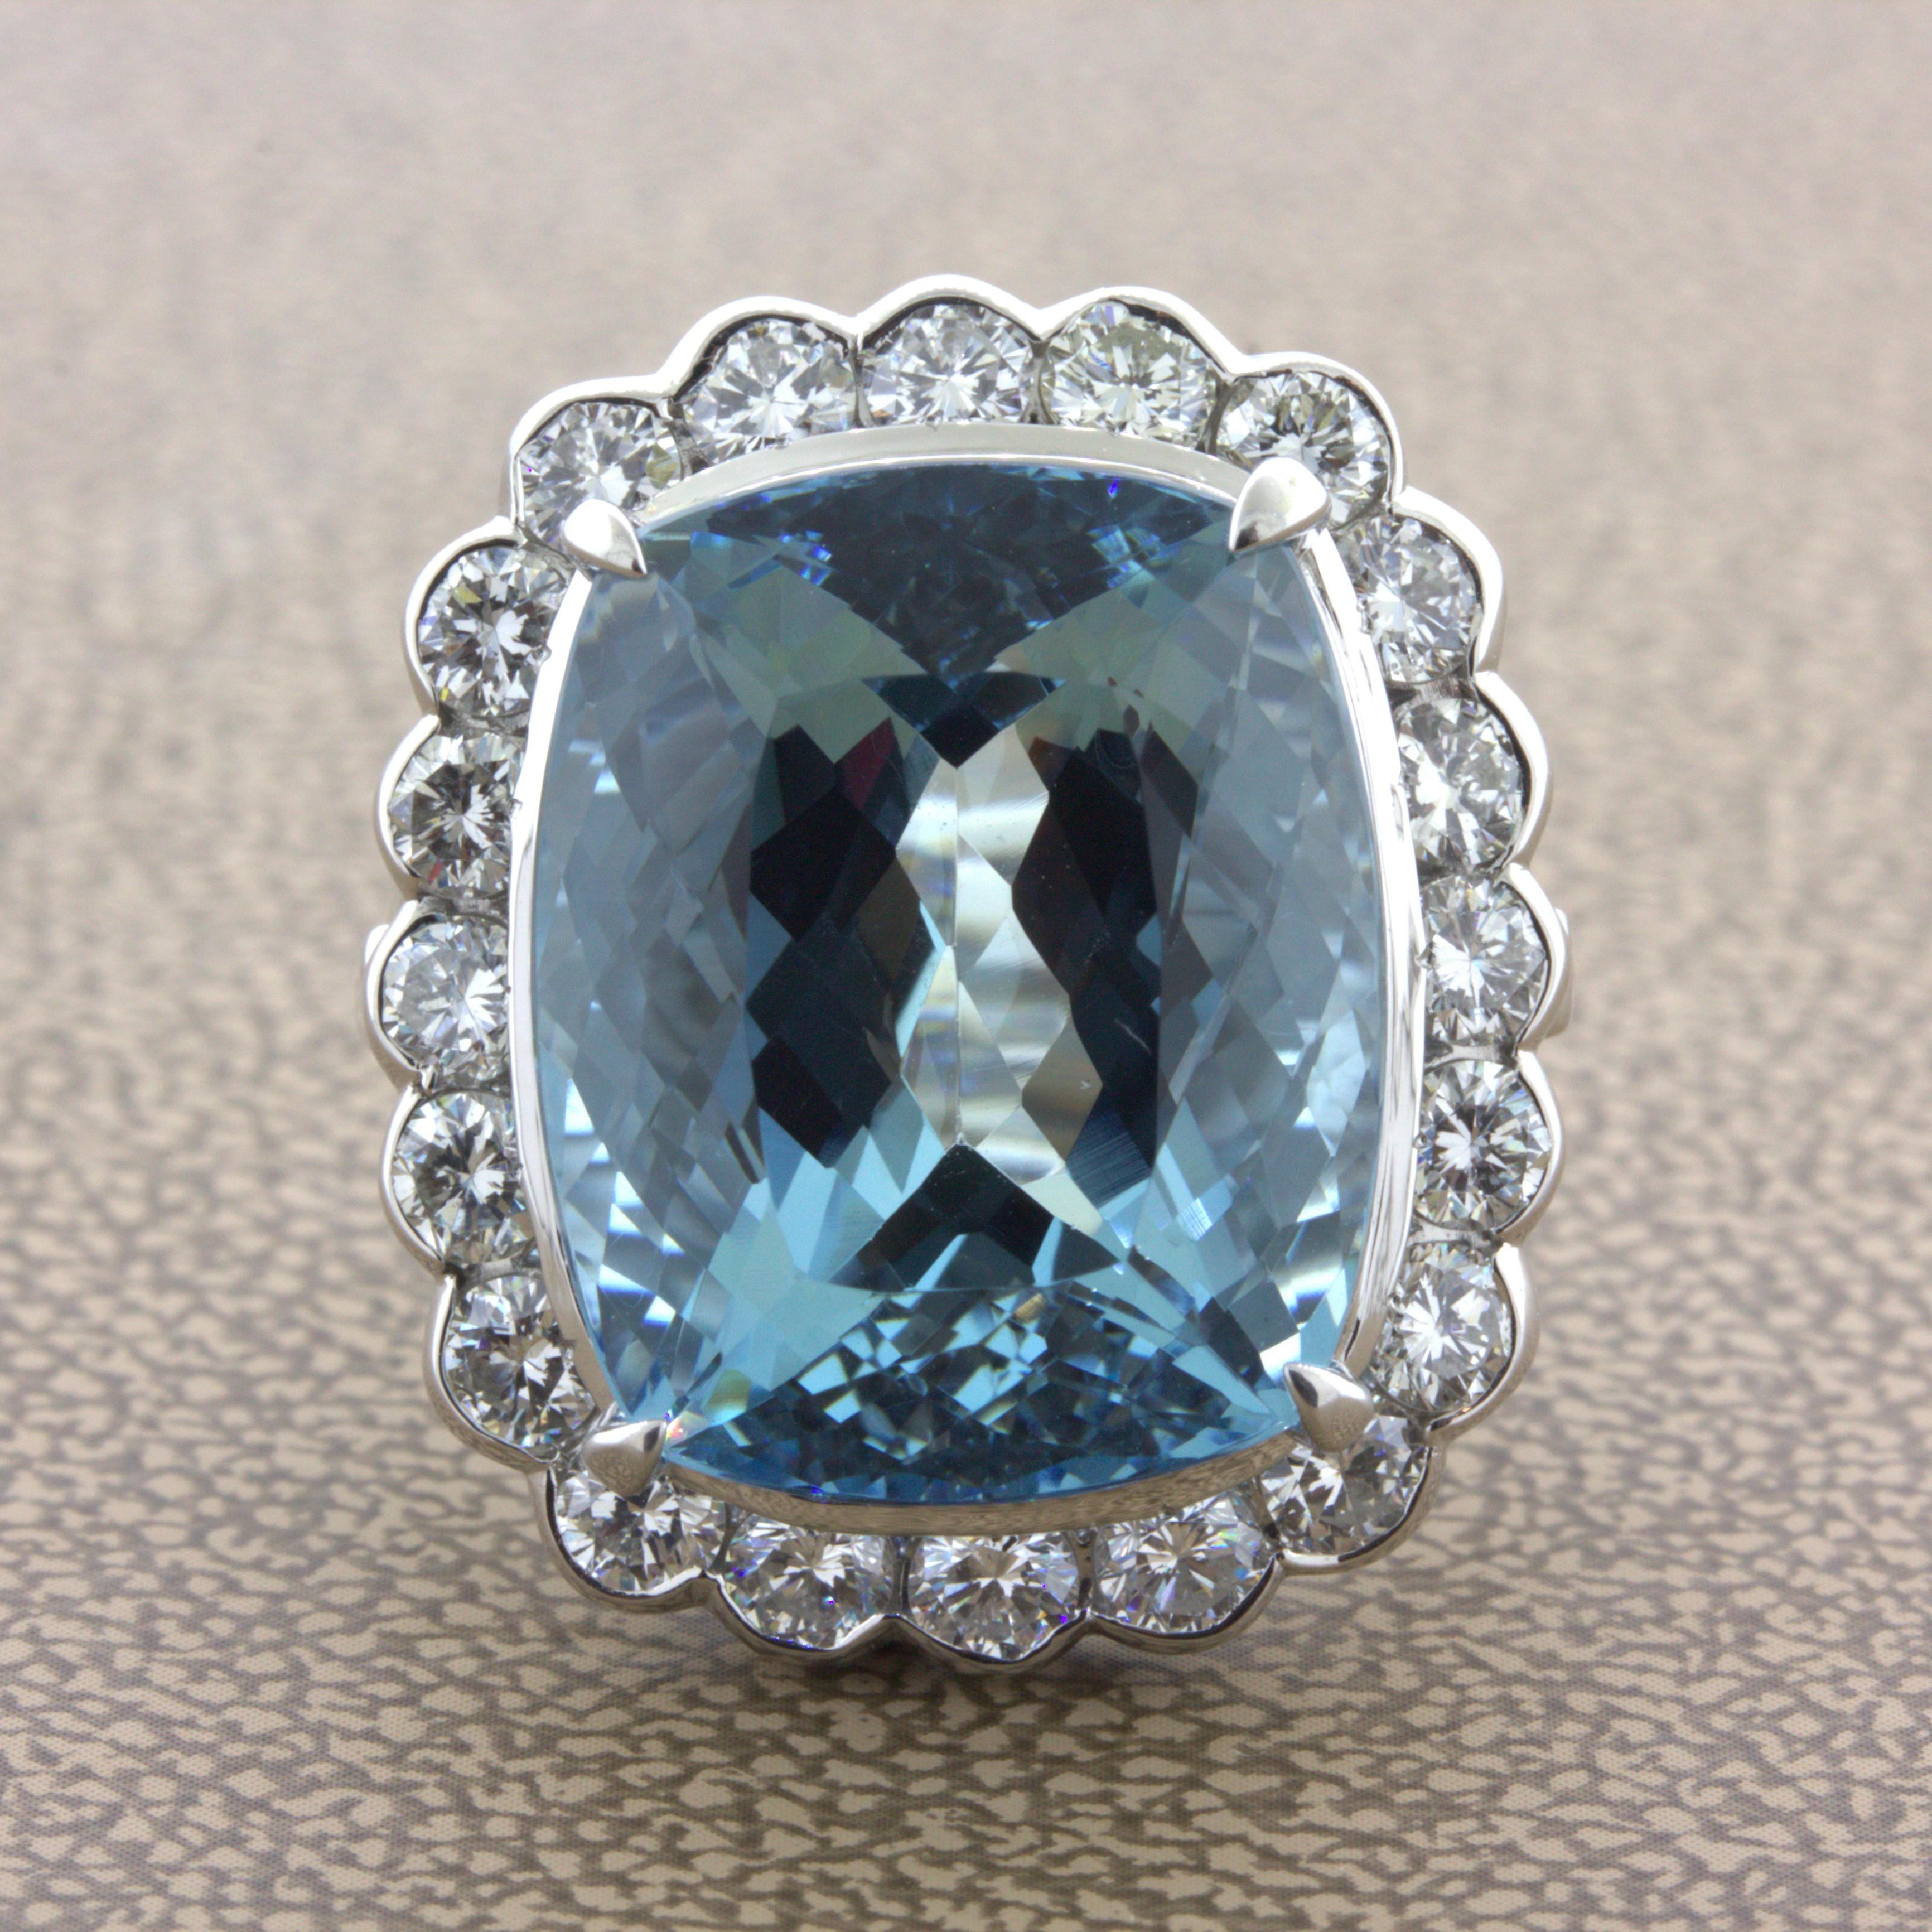 A lovely cocktail ring featuring a very fine cushion shape aquamarine. What makes this aqua special is the combination of its large size, 14.51 carats, rich sea-blue color, and its eye-clean clarity. The stone shines bright and brilliant with